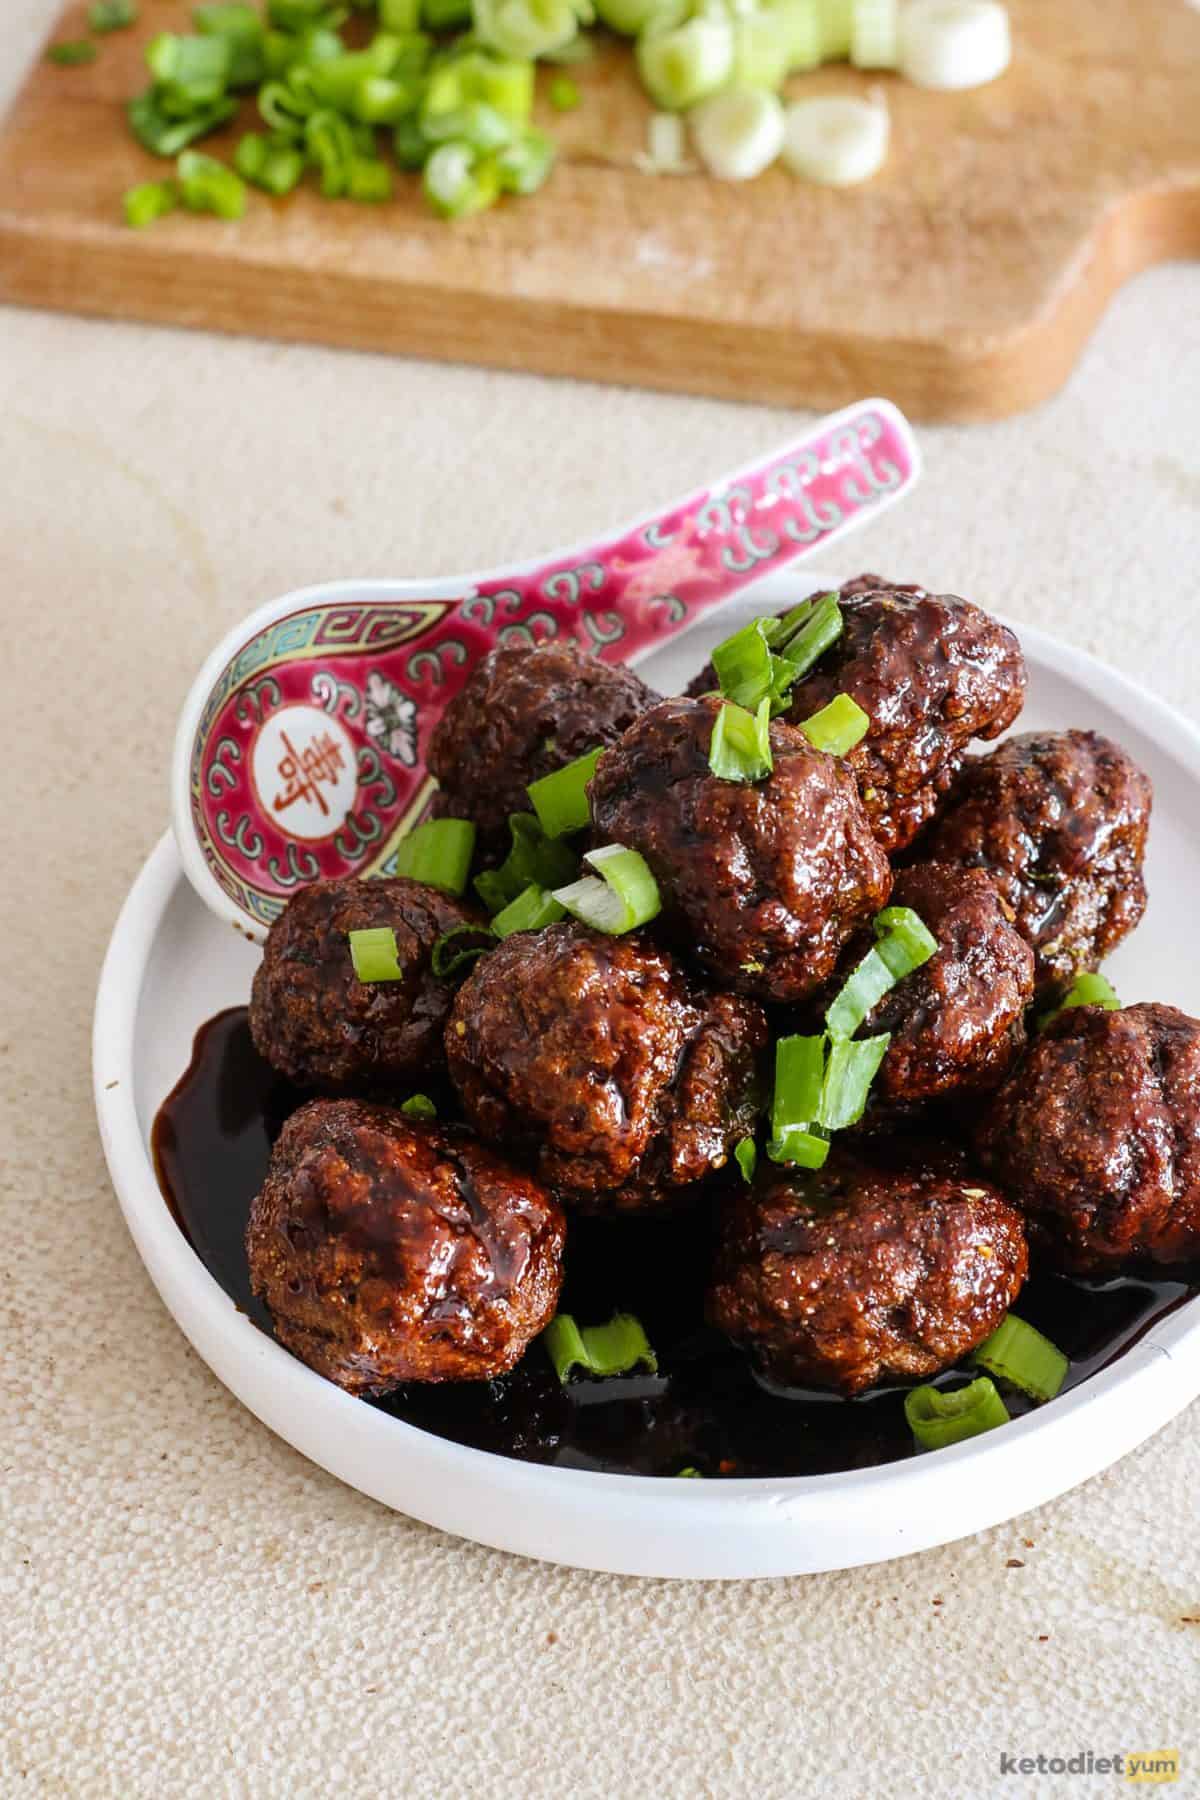 Kung pao meatballs garnished with green onion served in a white bowl